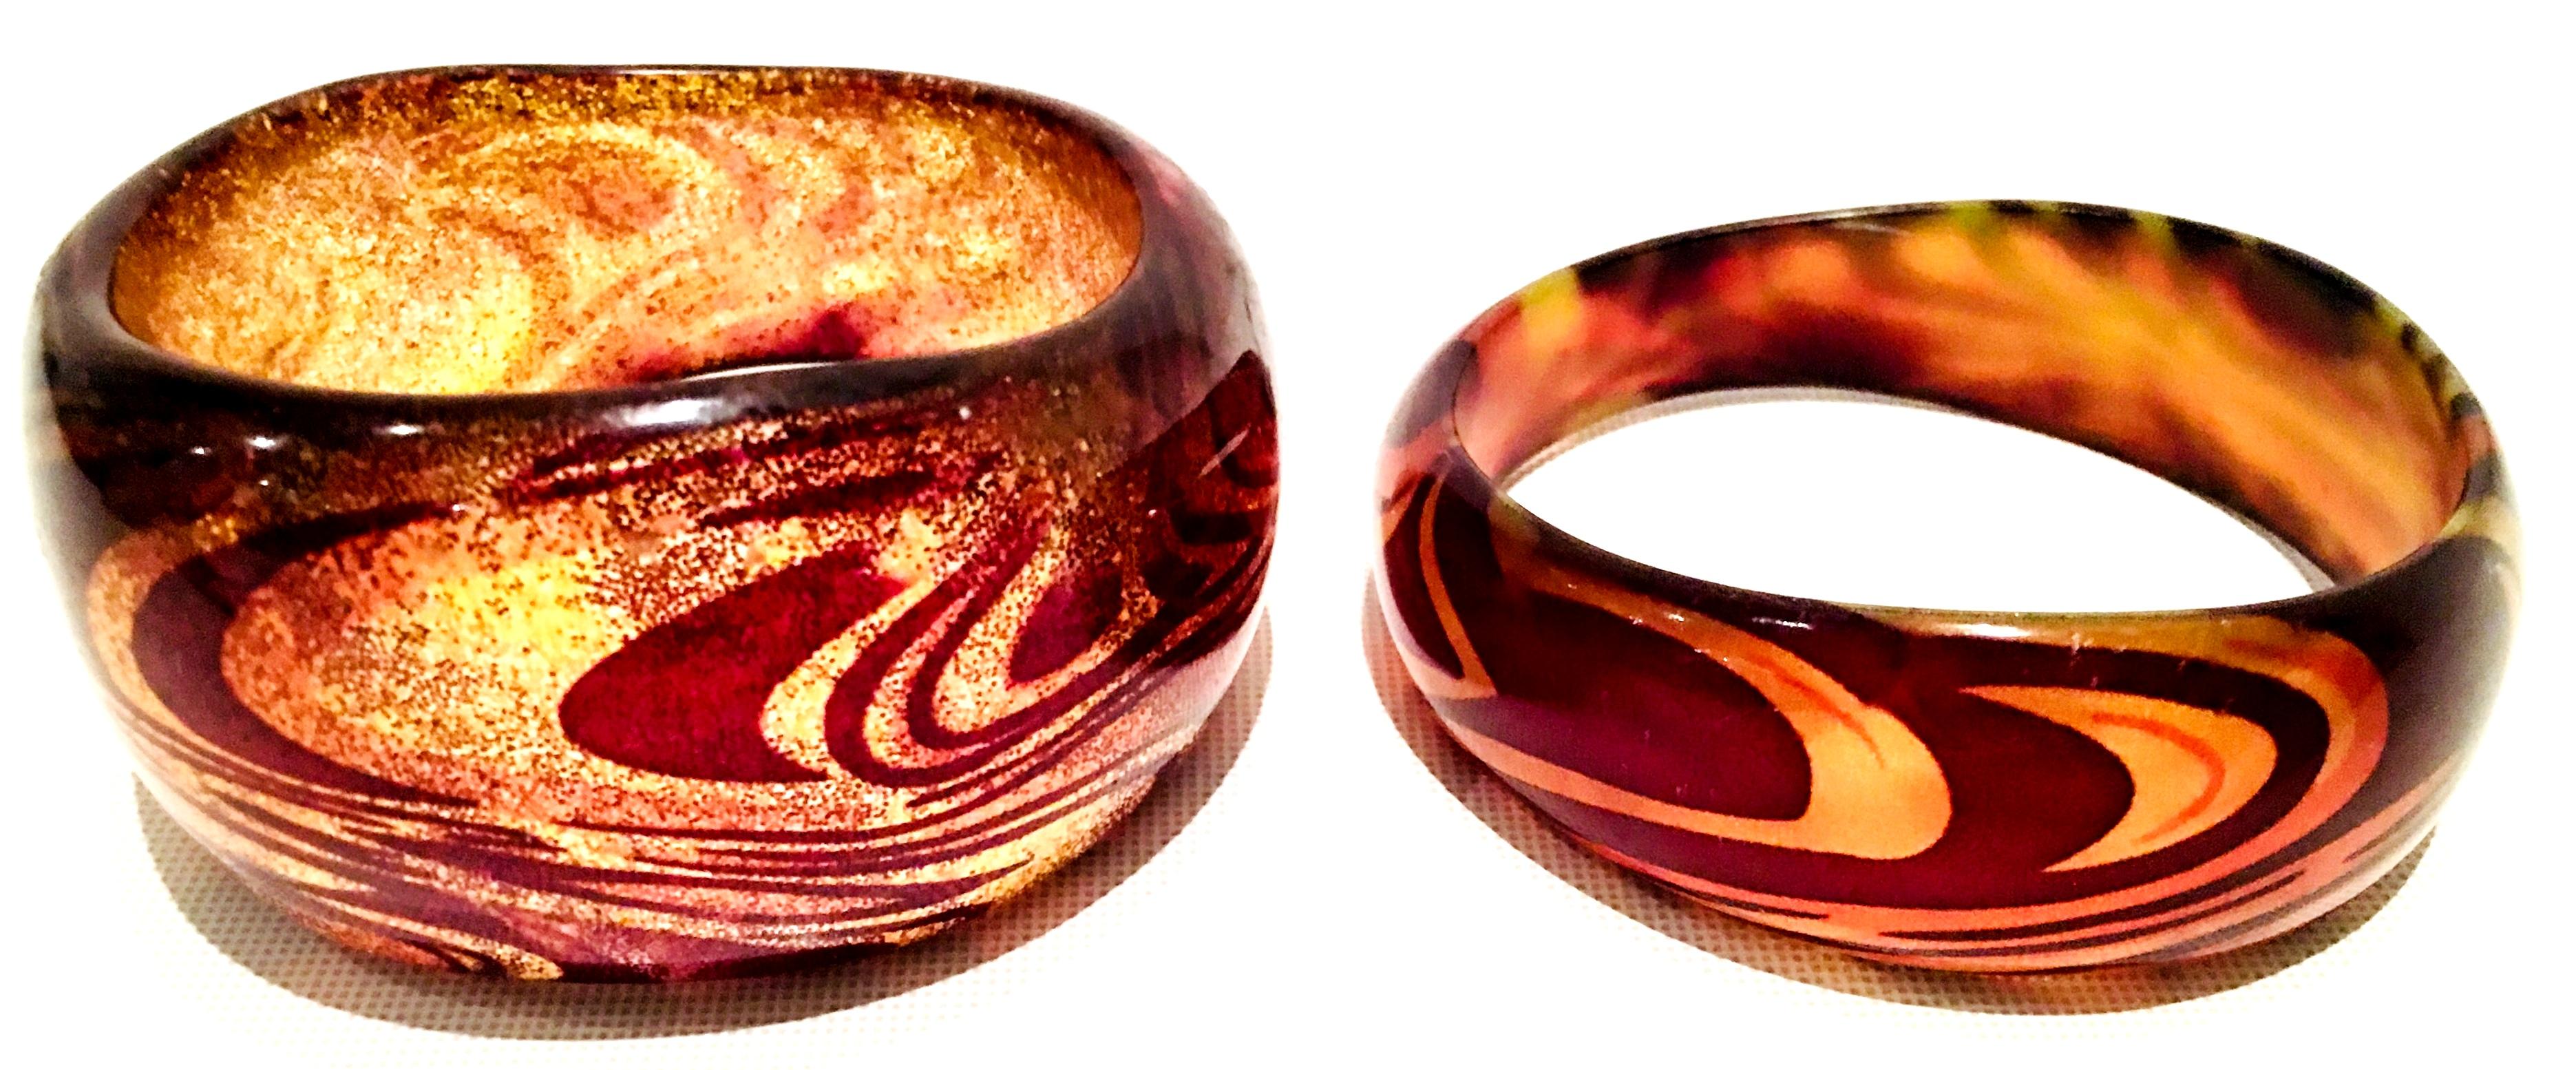 21st Century Set Of Two Lucite Metallic Feather Print Bangle. This Set of Two Metallic Feather Print Bangle Bracelets features a warm palette of amber, brown and gold. The 2 piece set includes two different size bangle bracelet
smaller bangle